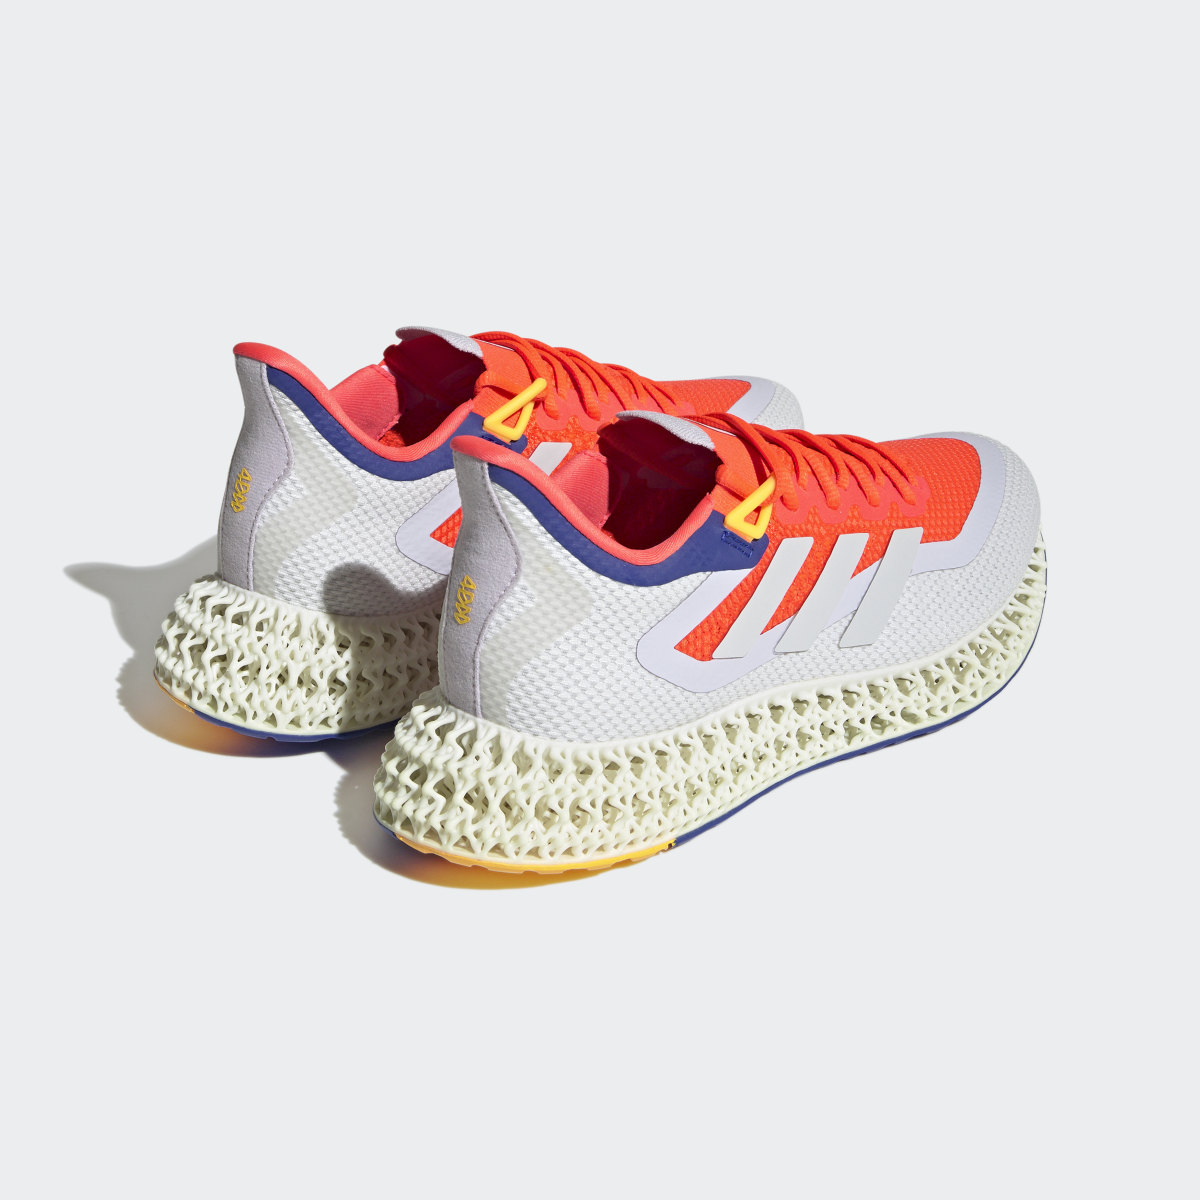 Adidas 4DFWD 2 Running Shoes. 6